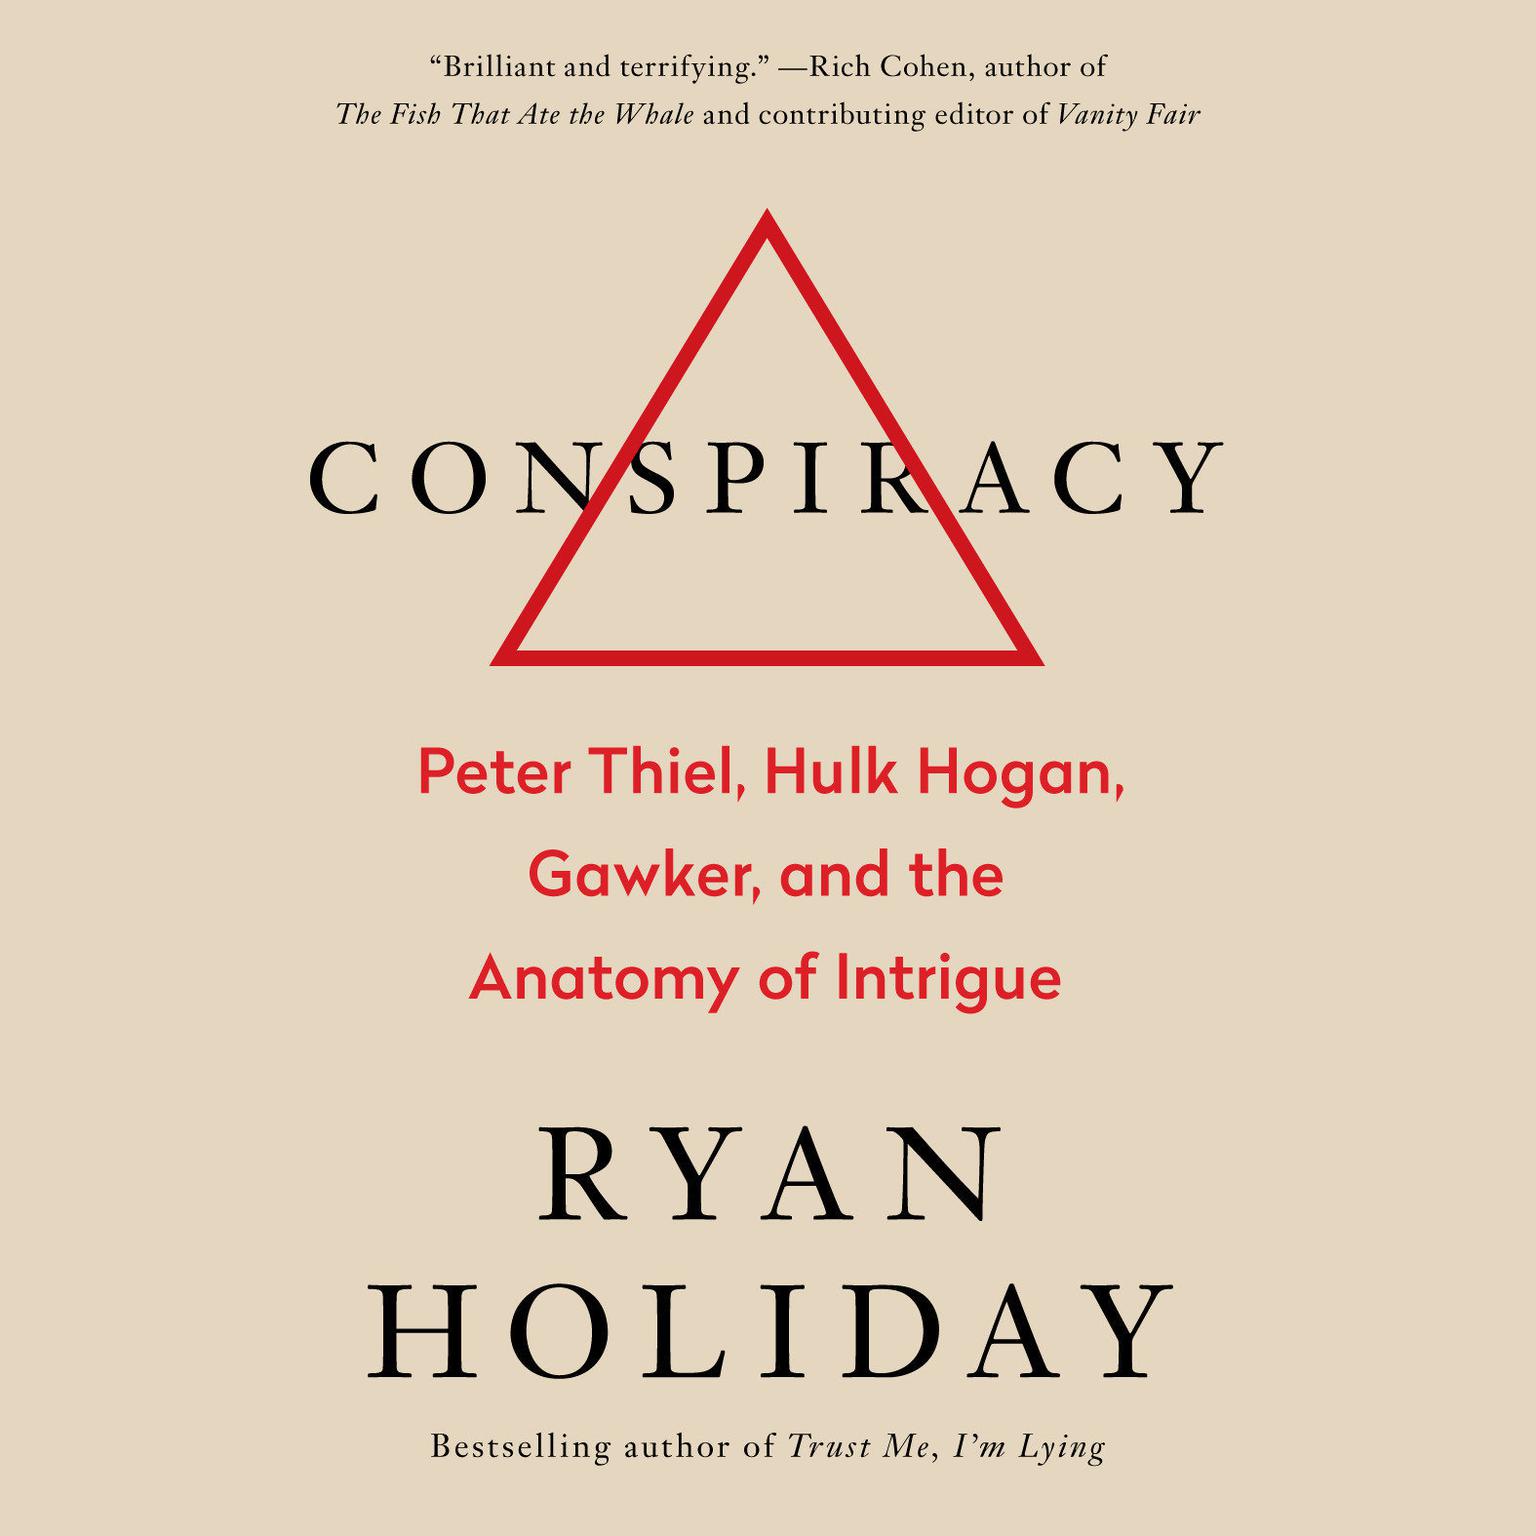 Conspiracy: A True Story of Power, Sex, and a Billionaires Secret Plot to Destroy a Media Empire Audiobook, by Ryan Holiday